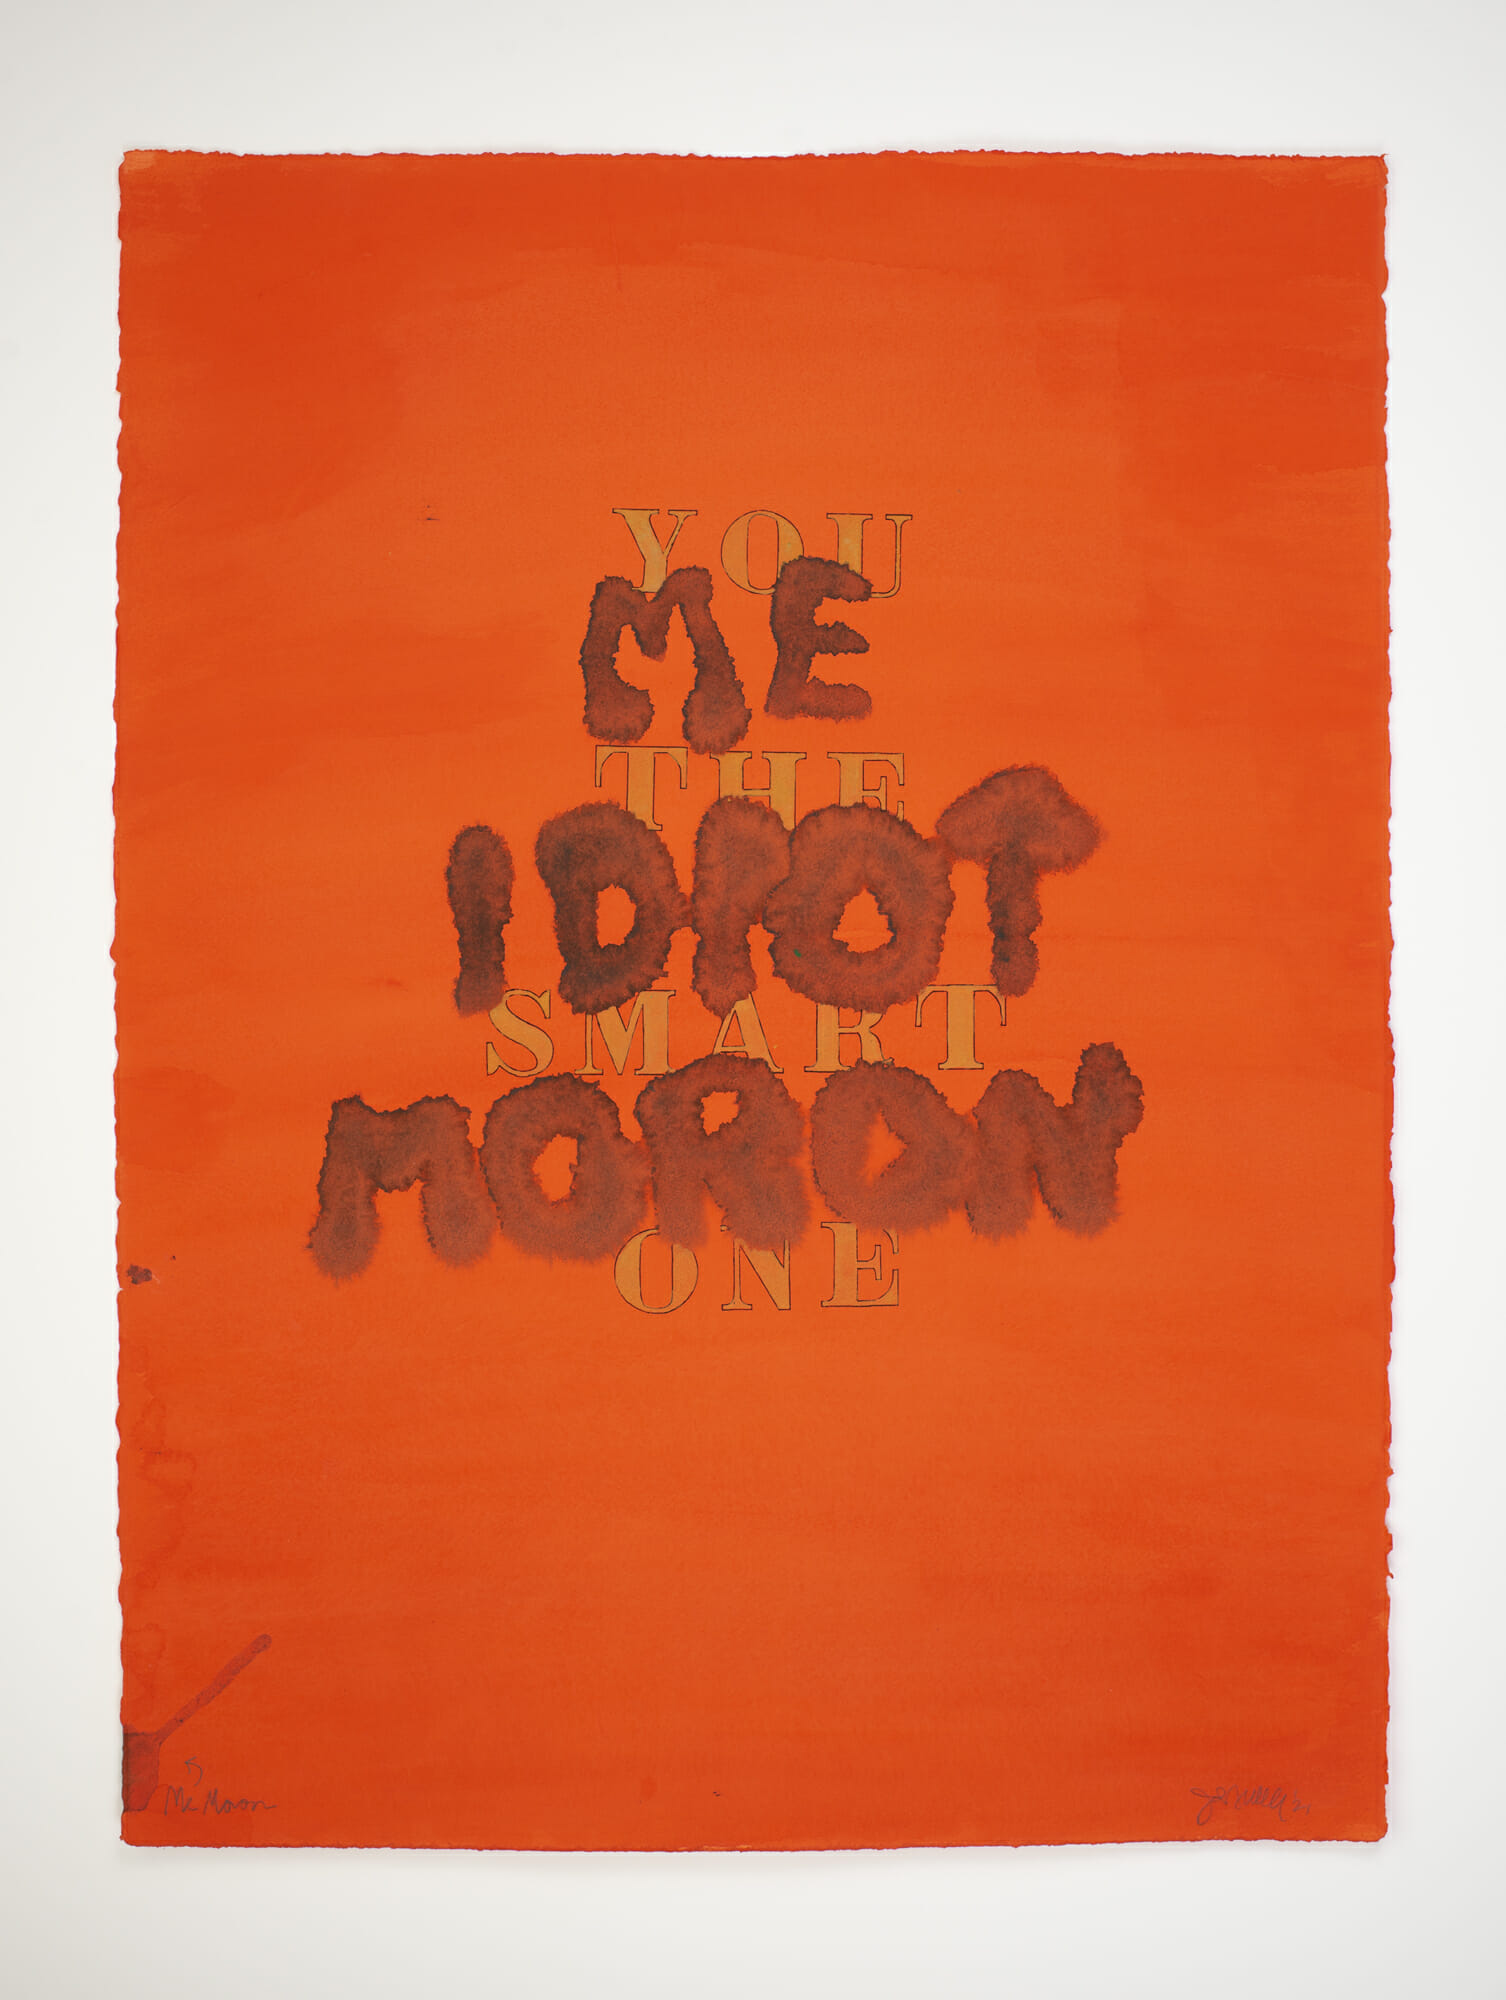 Mr. Moron | 2022 | mixed media on paper | 22 x 30 in.